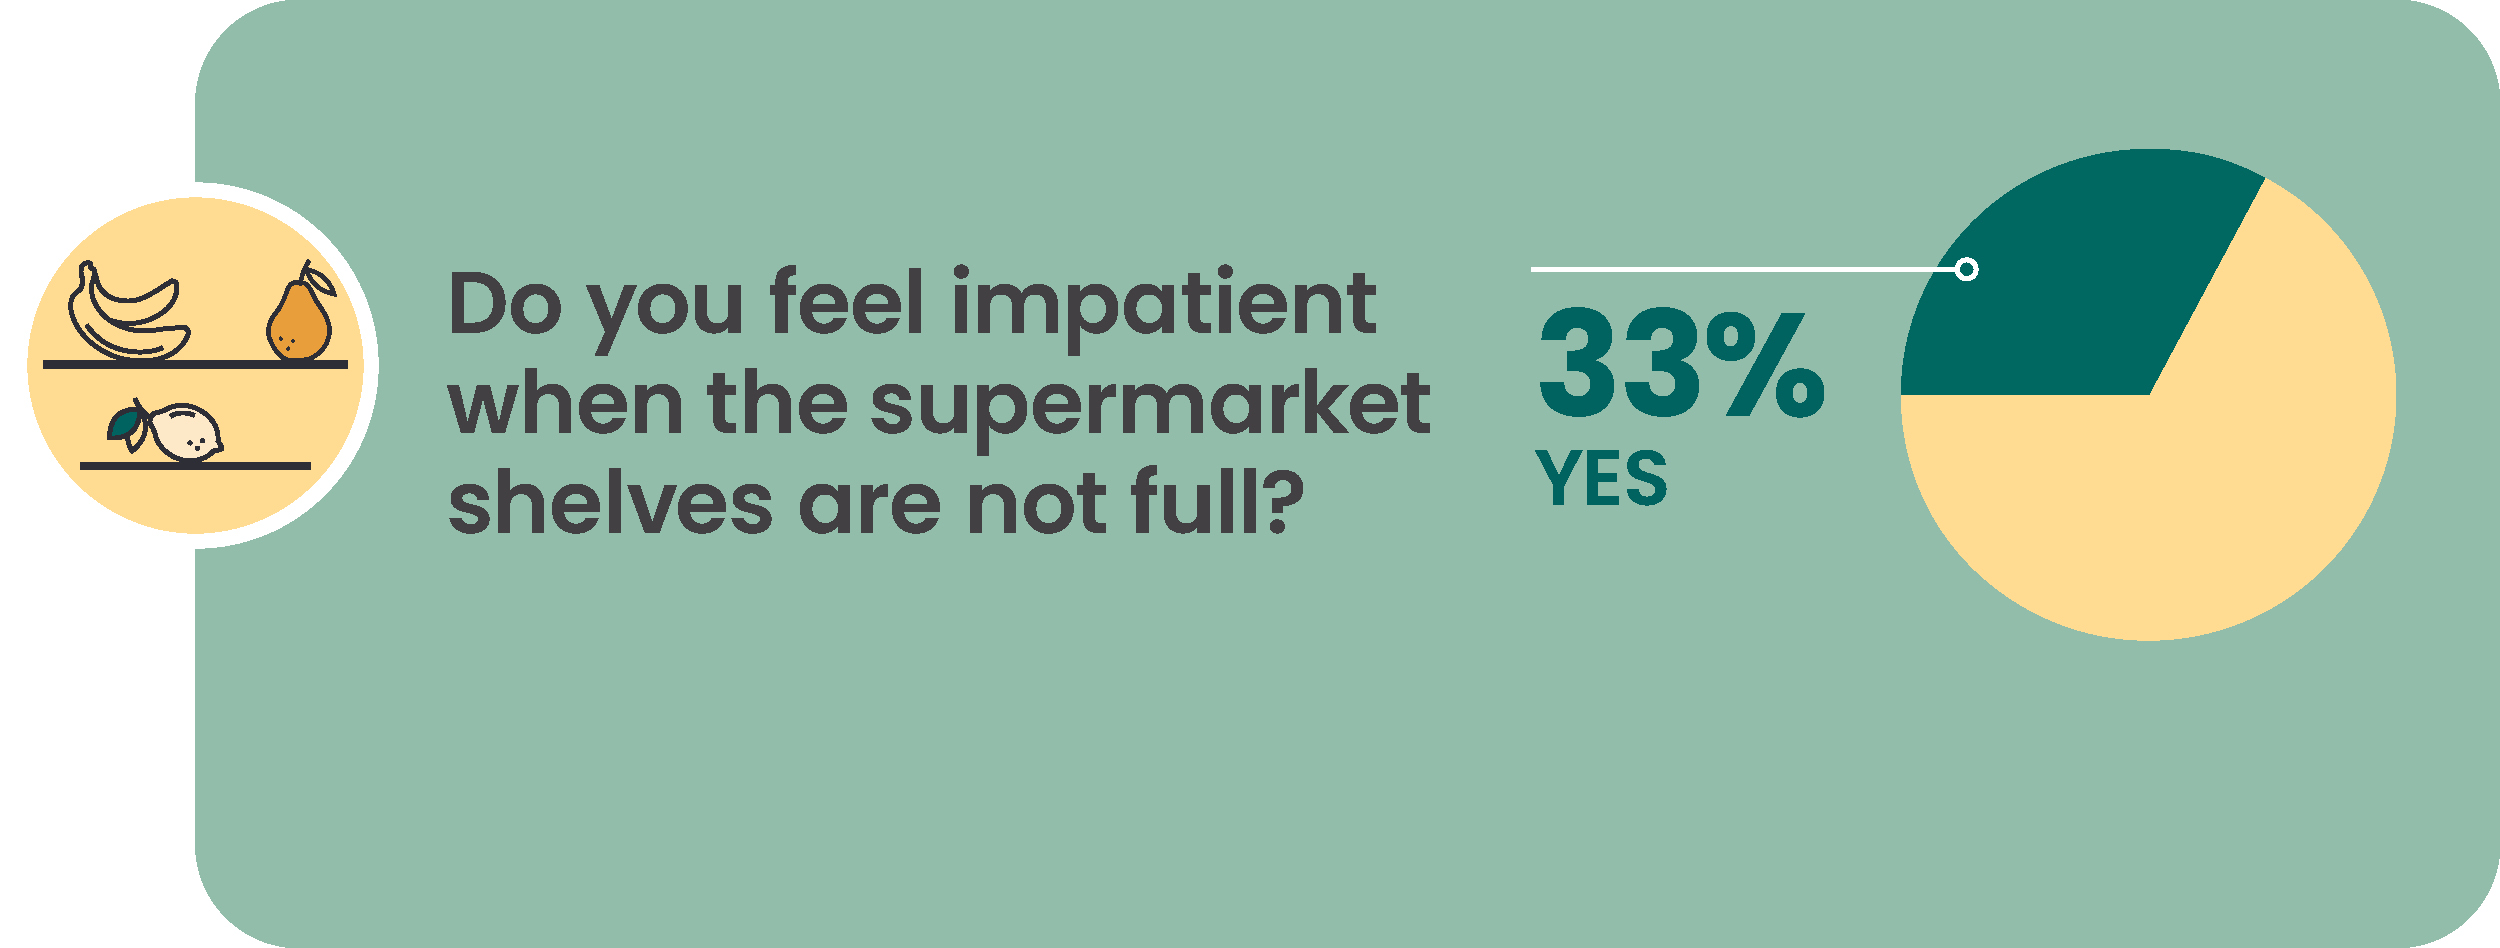 Stat graphic that shows 33% of consumers feel impatient when the supermarket shelves are not full